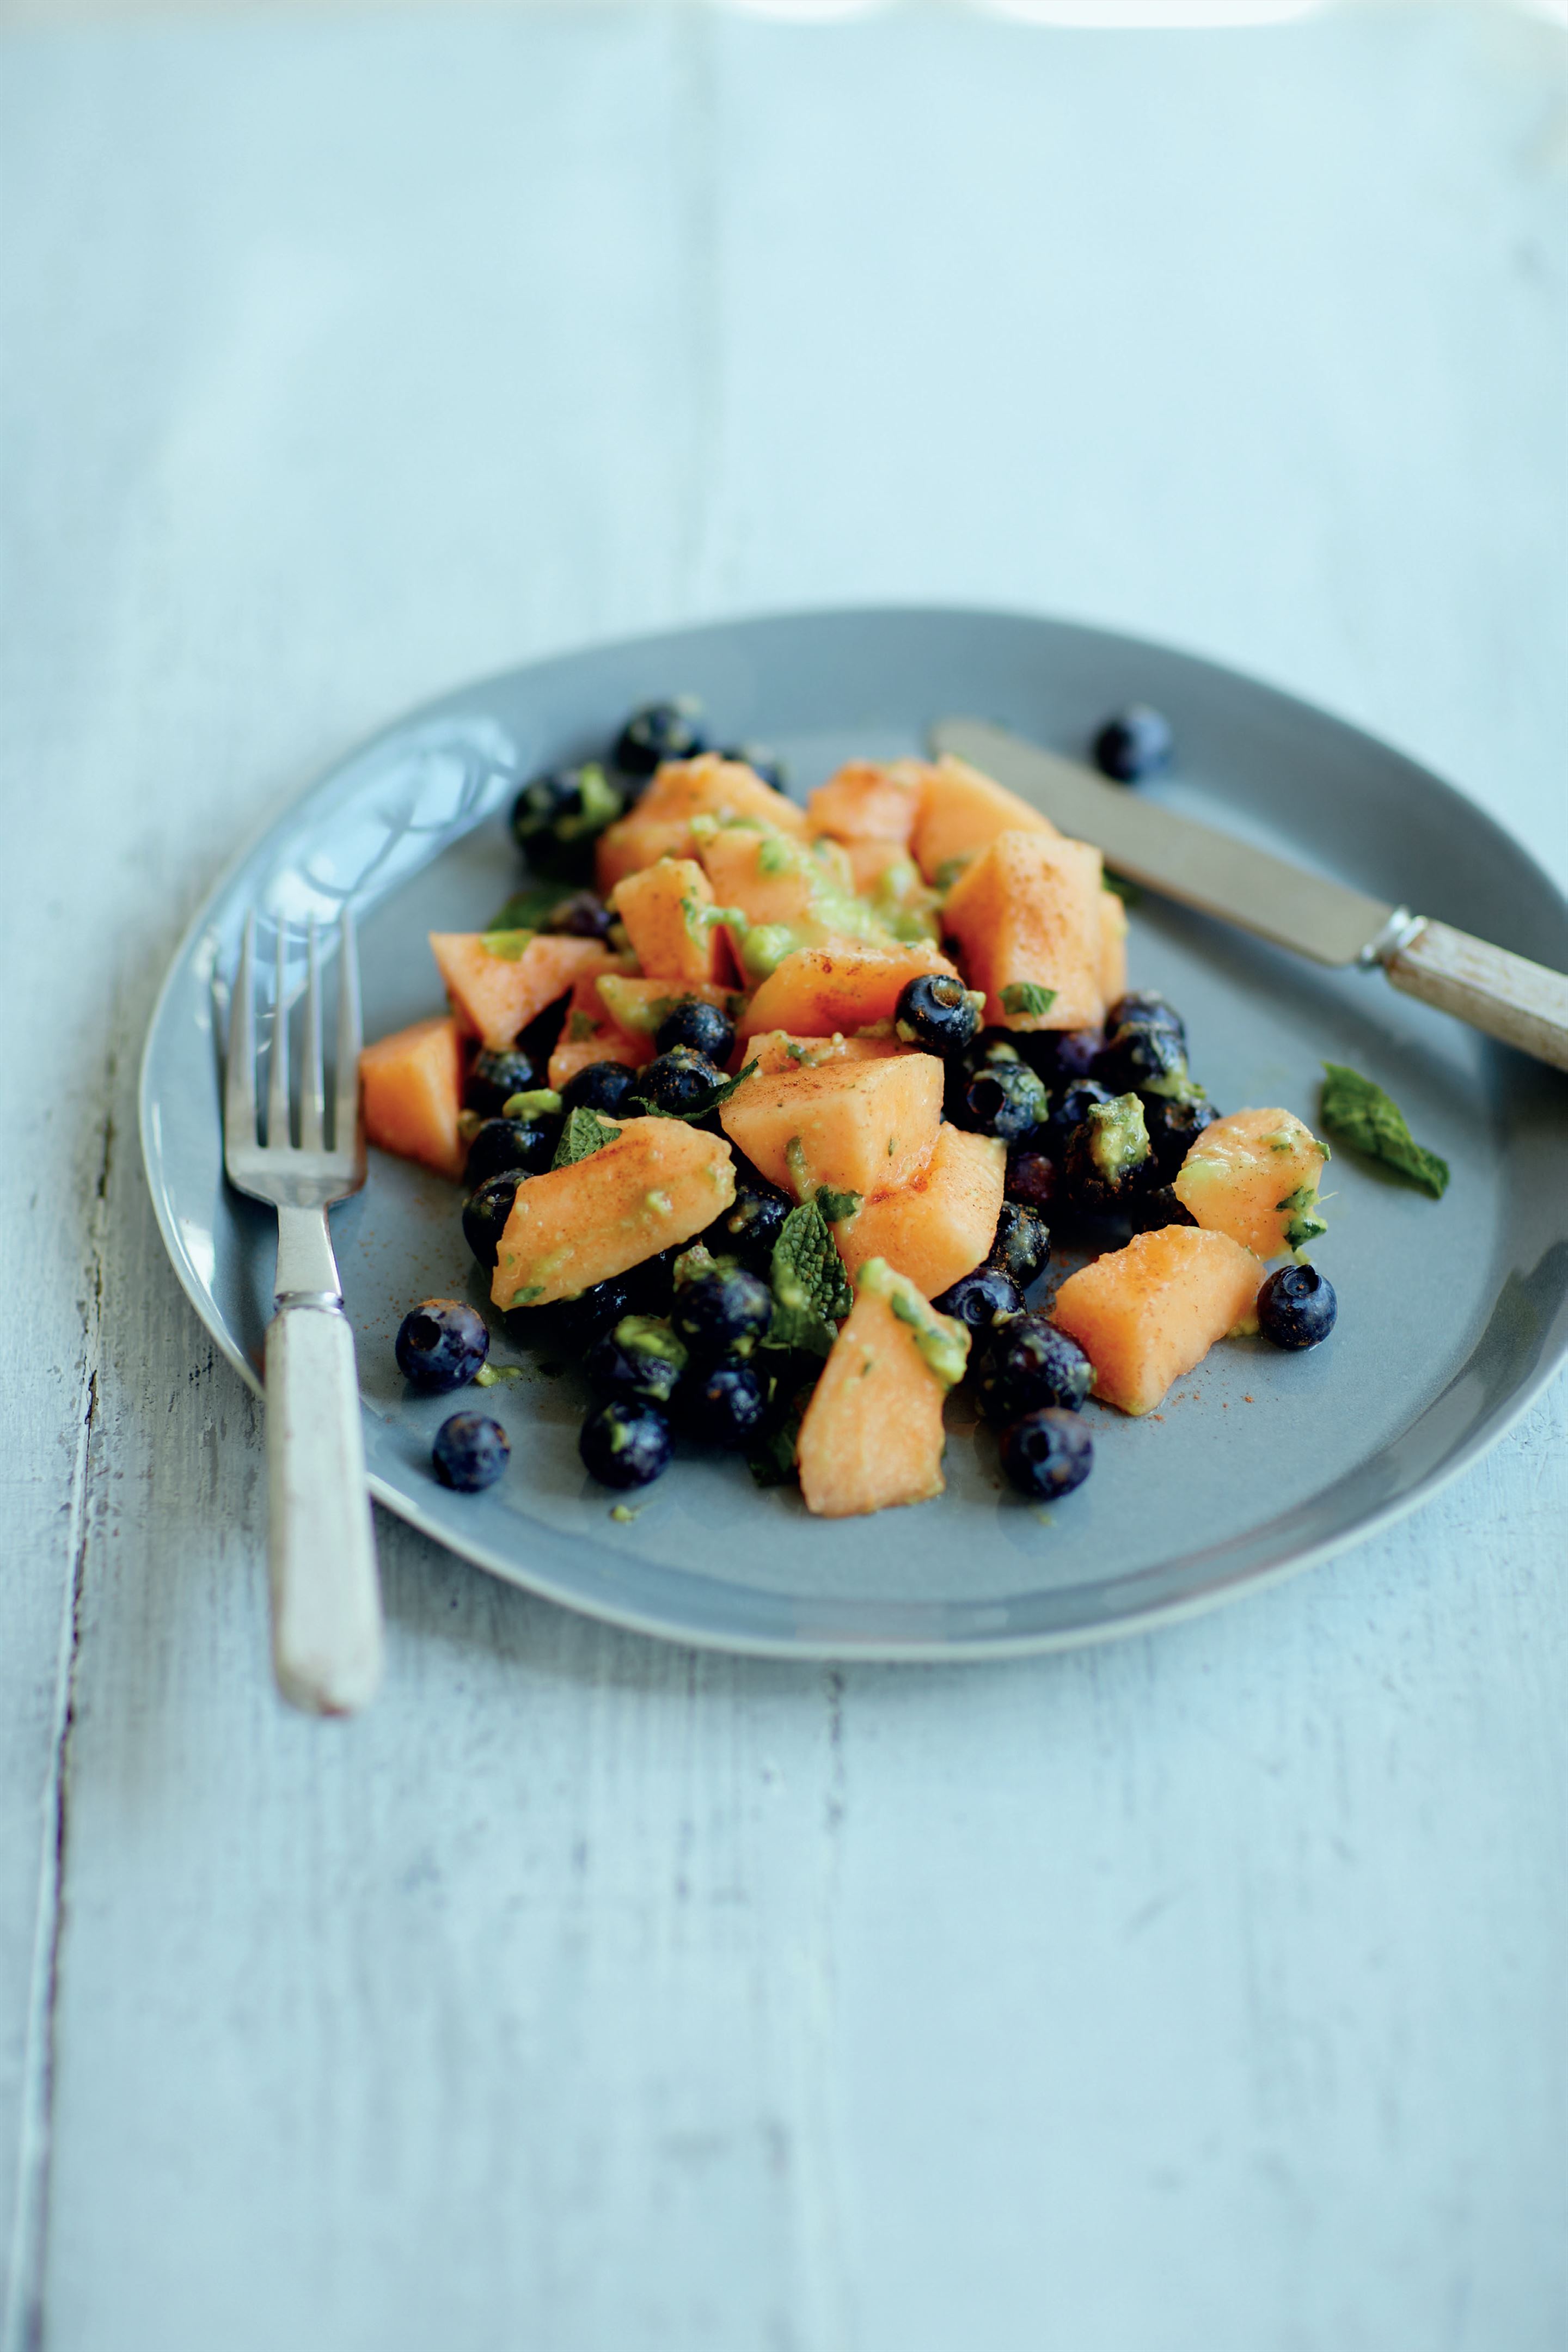 Cantaloupe melon and blueberry salad with avocado lime dressing